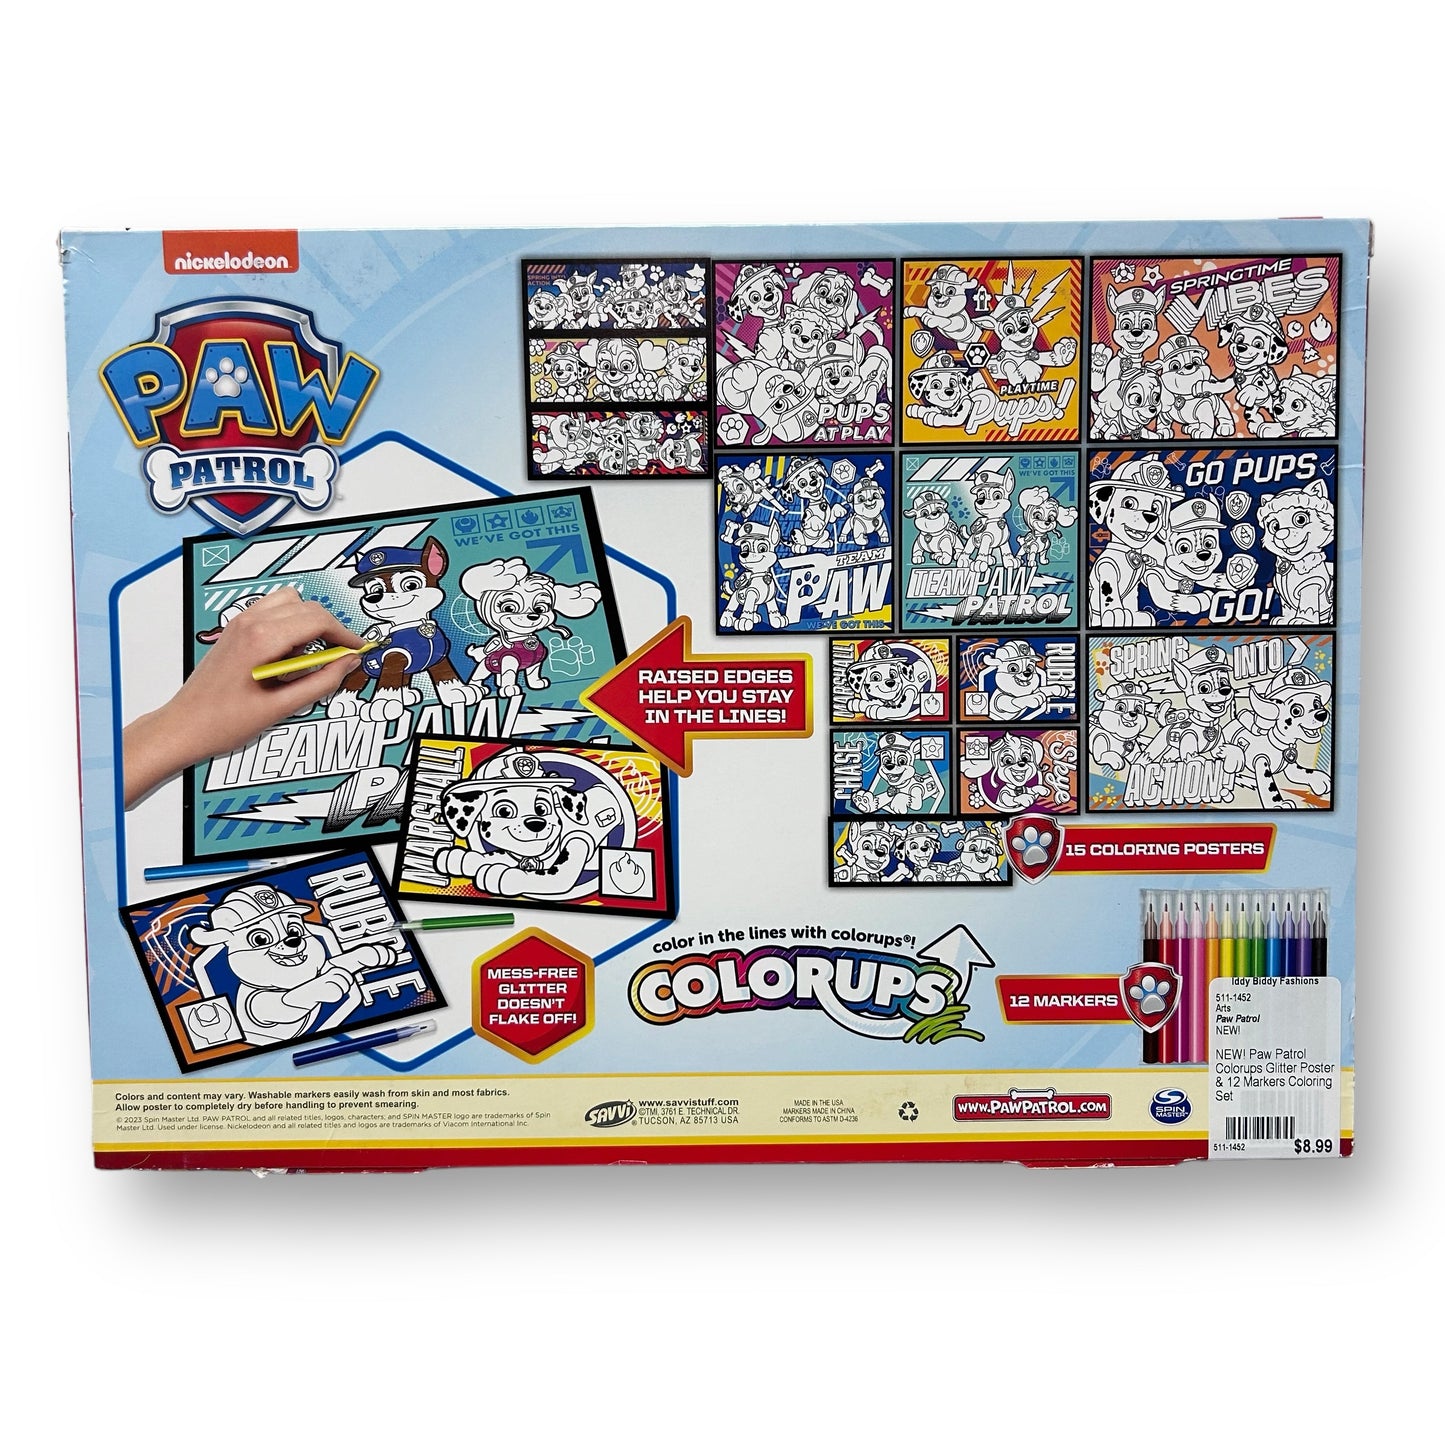 NEW! Paw Patrol Colorups Glitter Poster & 12 Markers Coloring Set